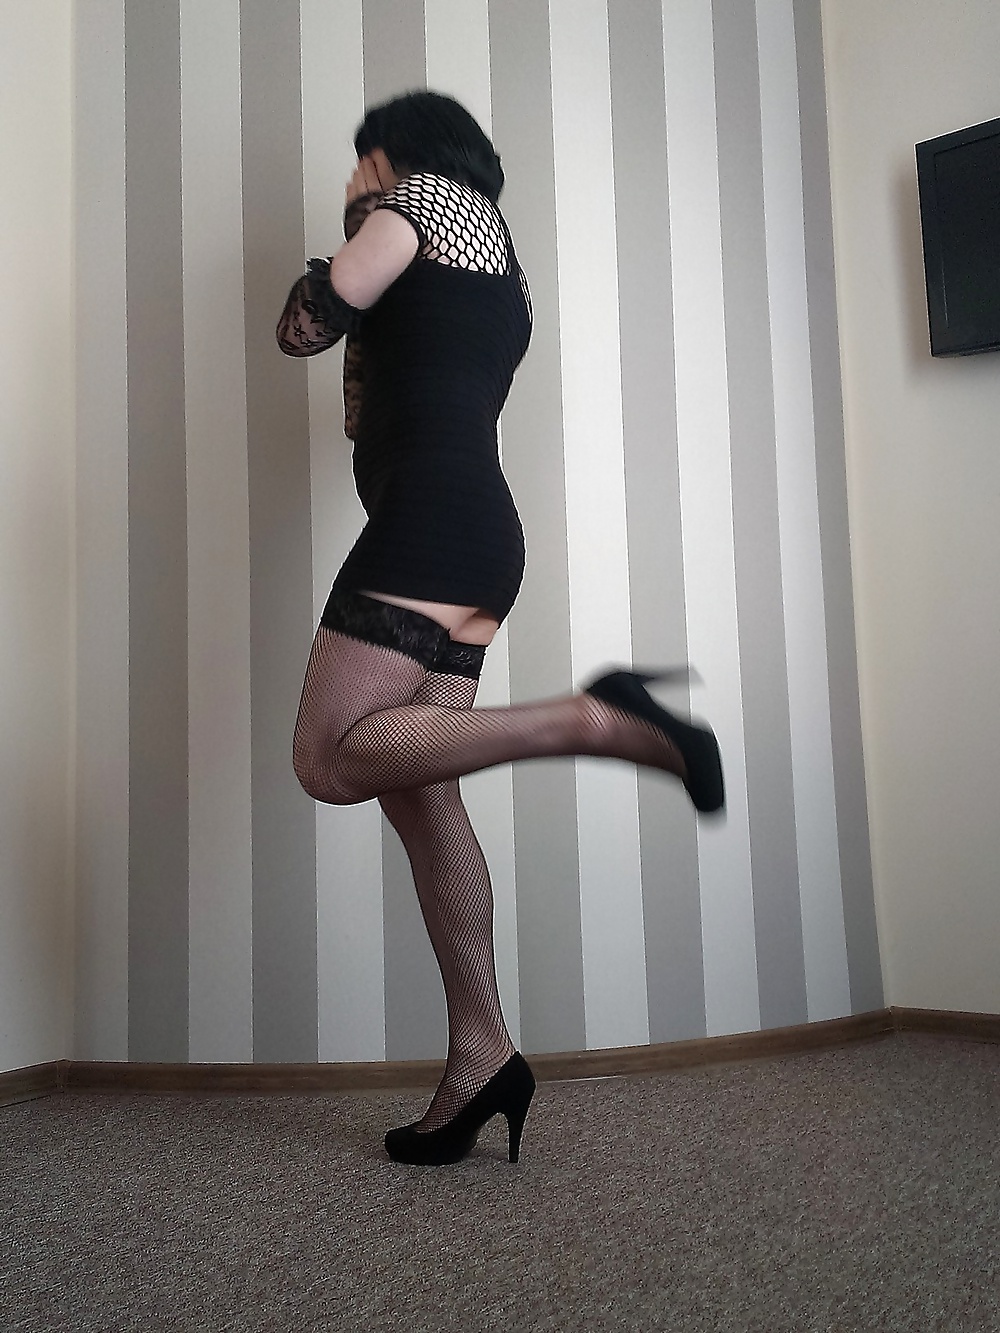 In a hotel room - black minidress, stockings and heels  #28504339